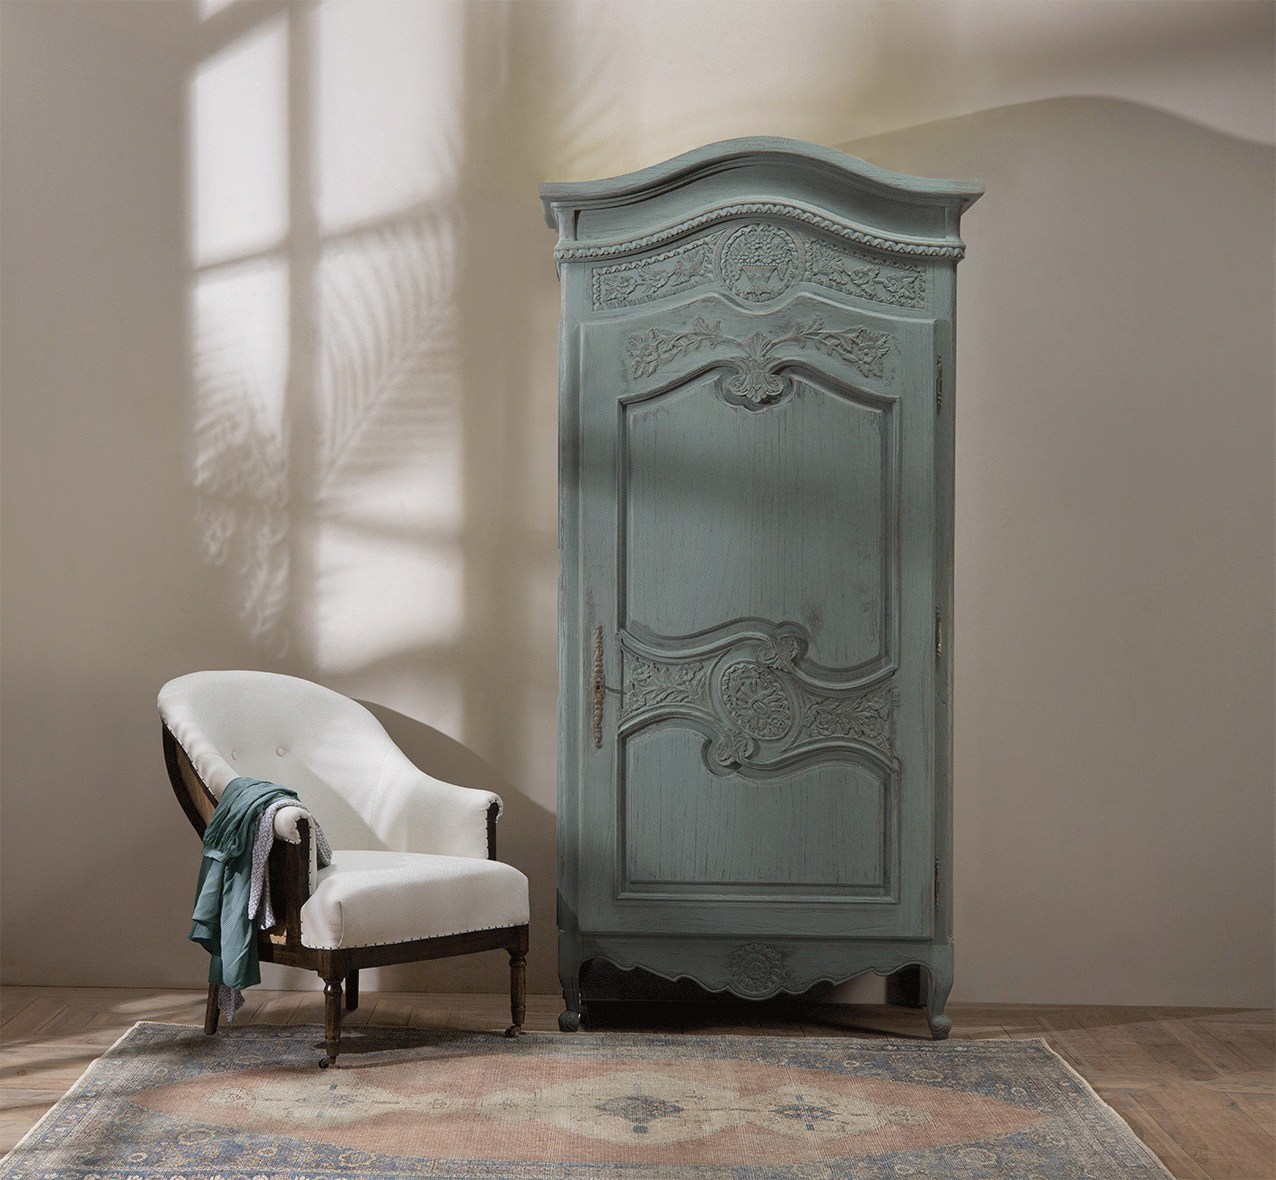 Classic French Wardrobe with single door and ornate hand-carved motif on the front